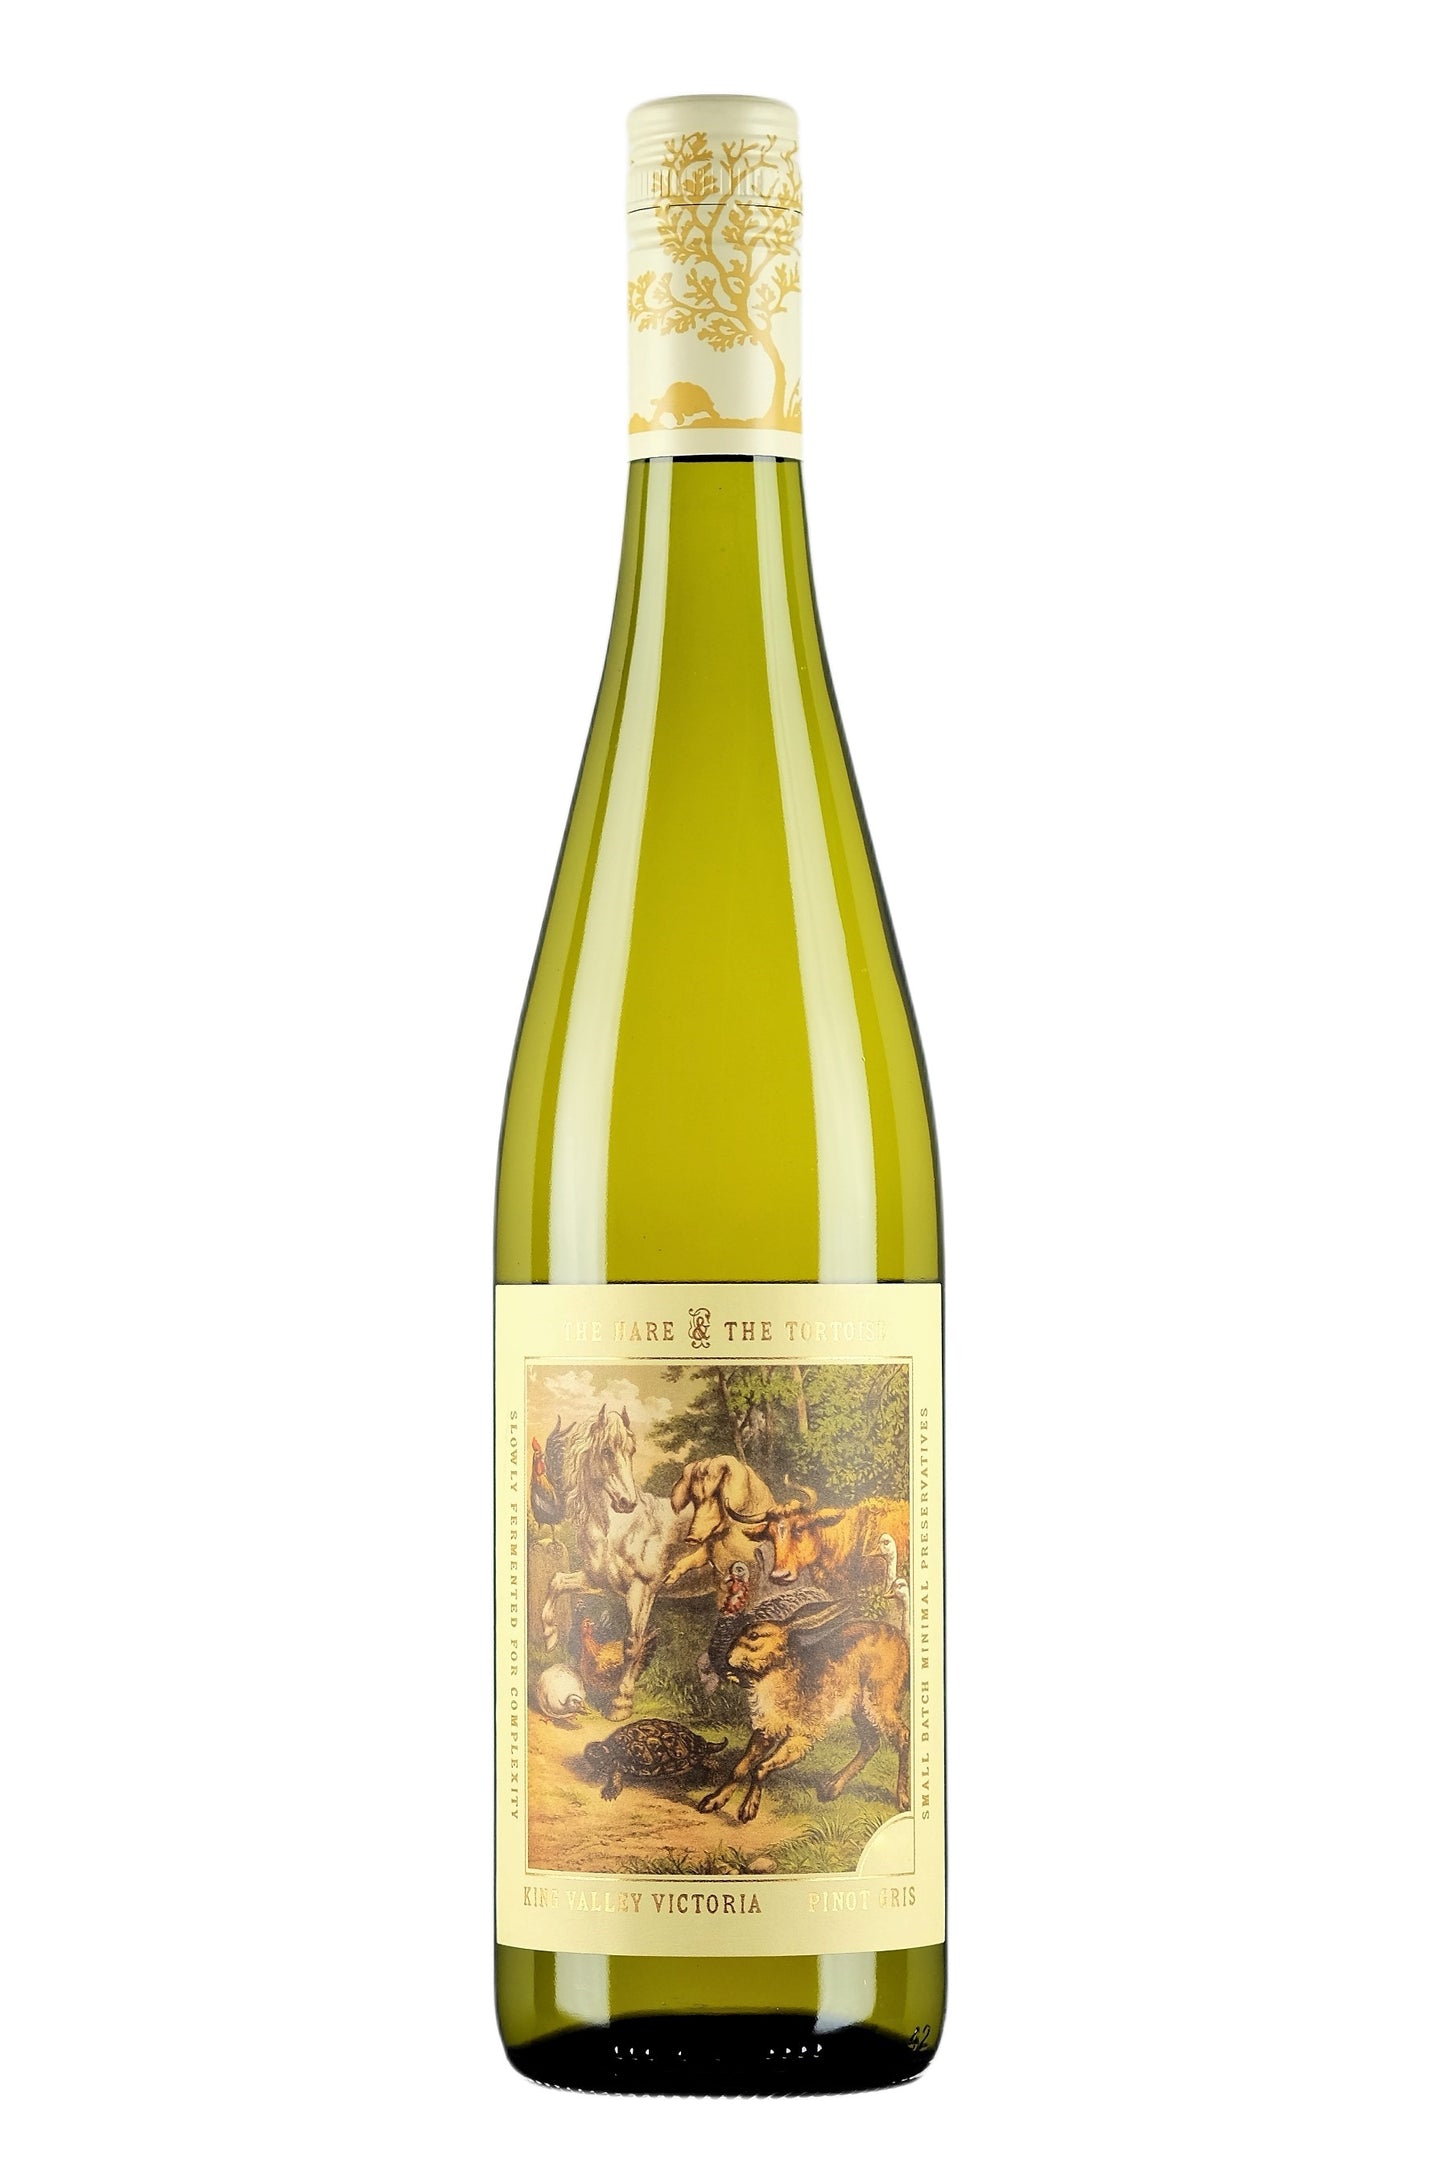 The Hare & The Tortoise Pinot Gris